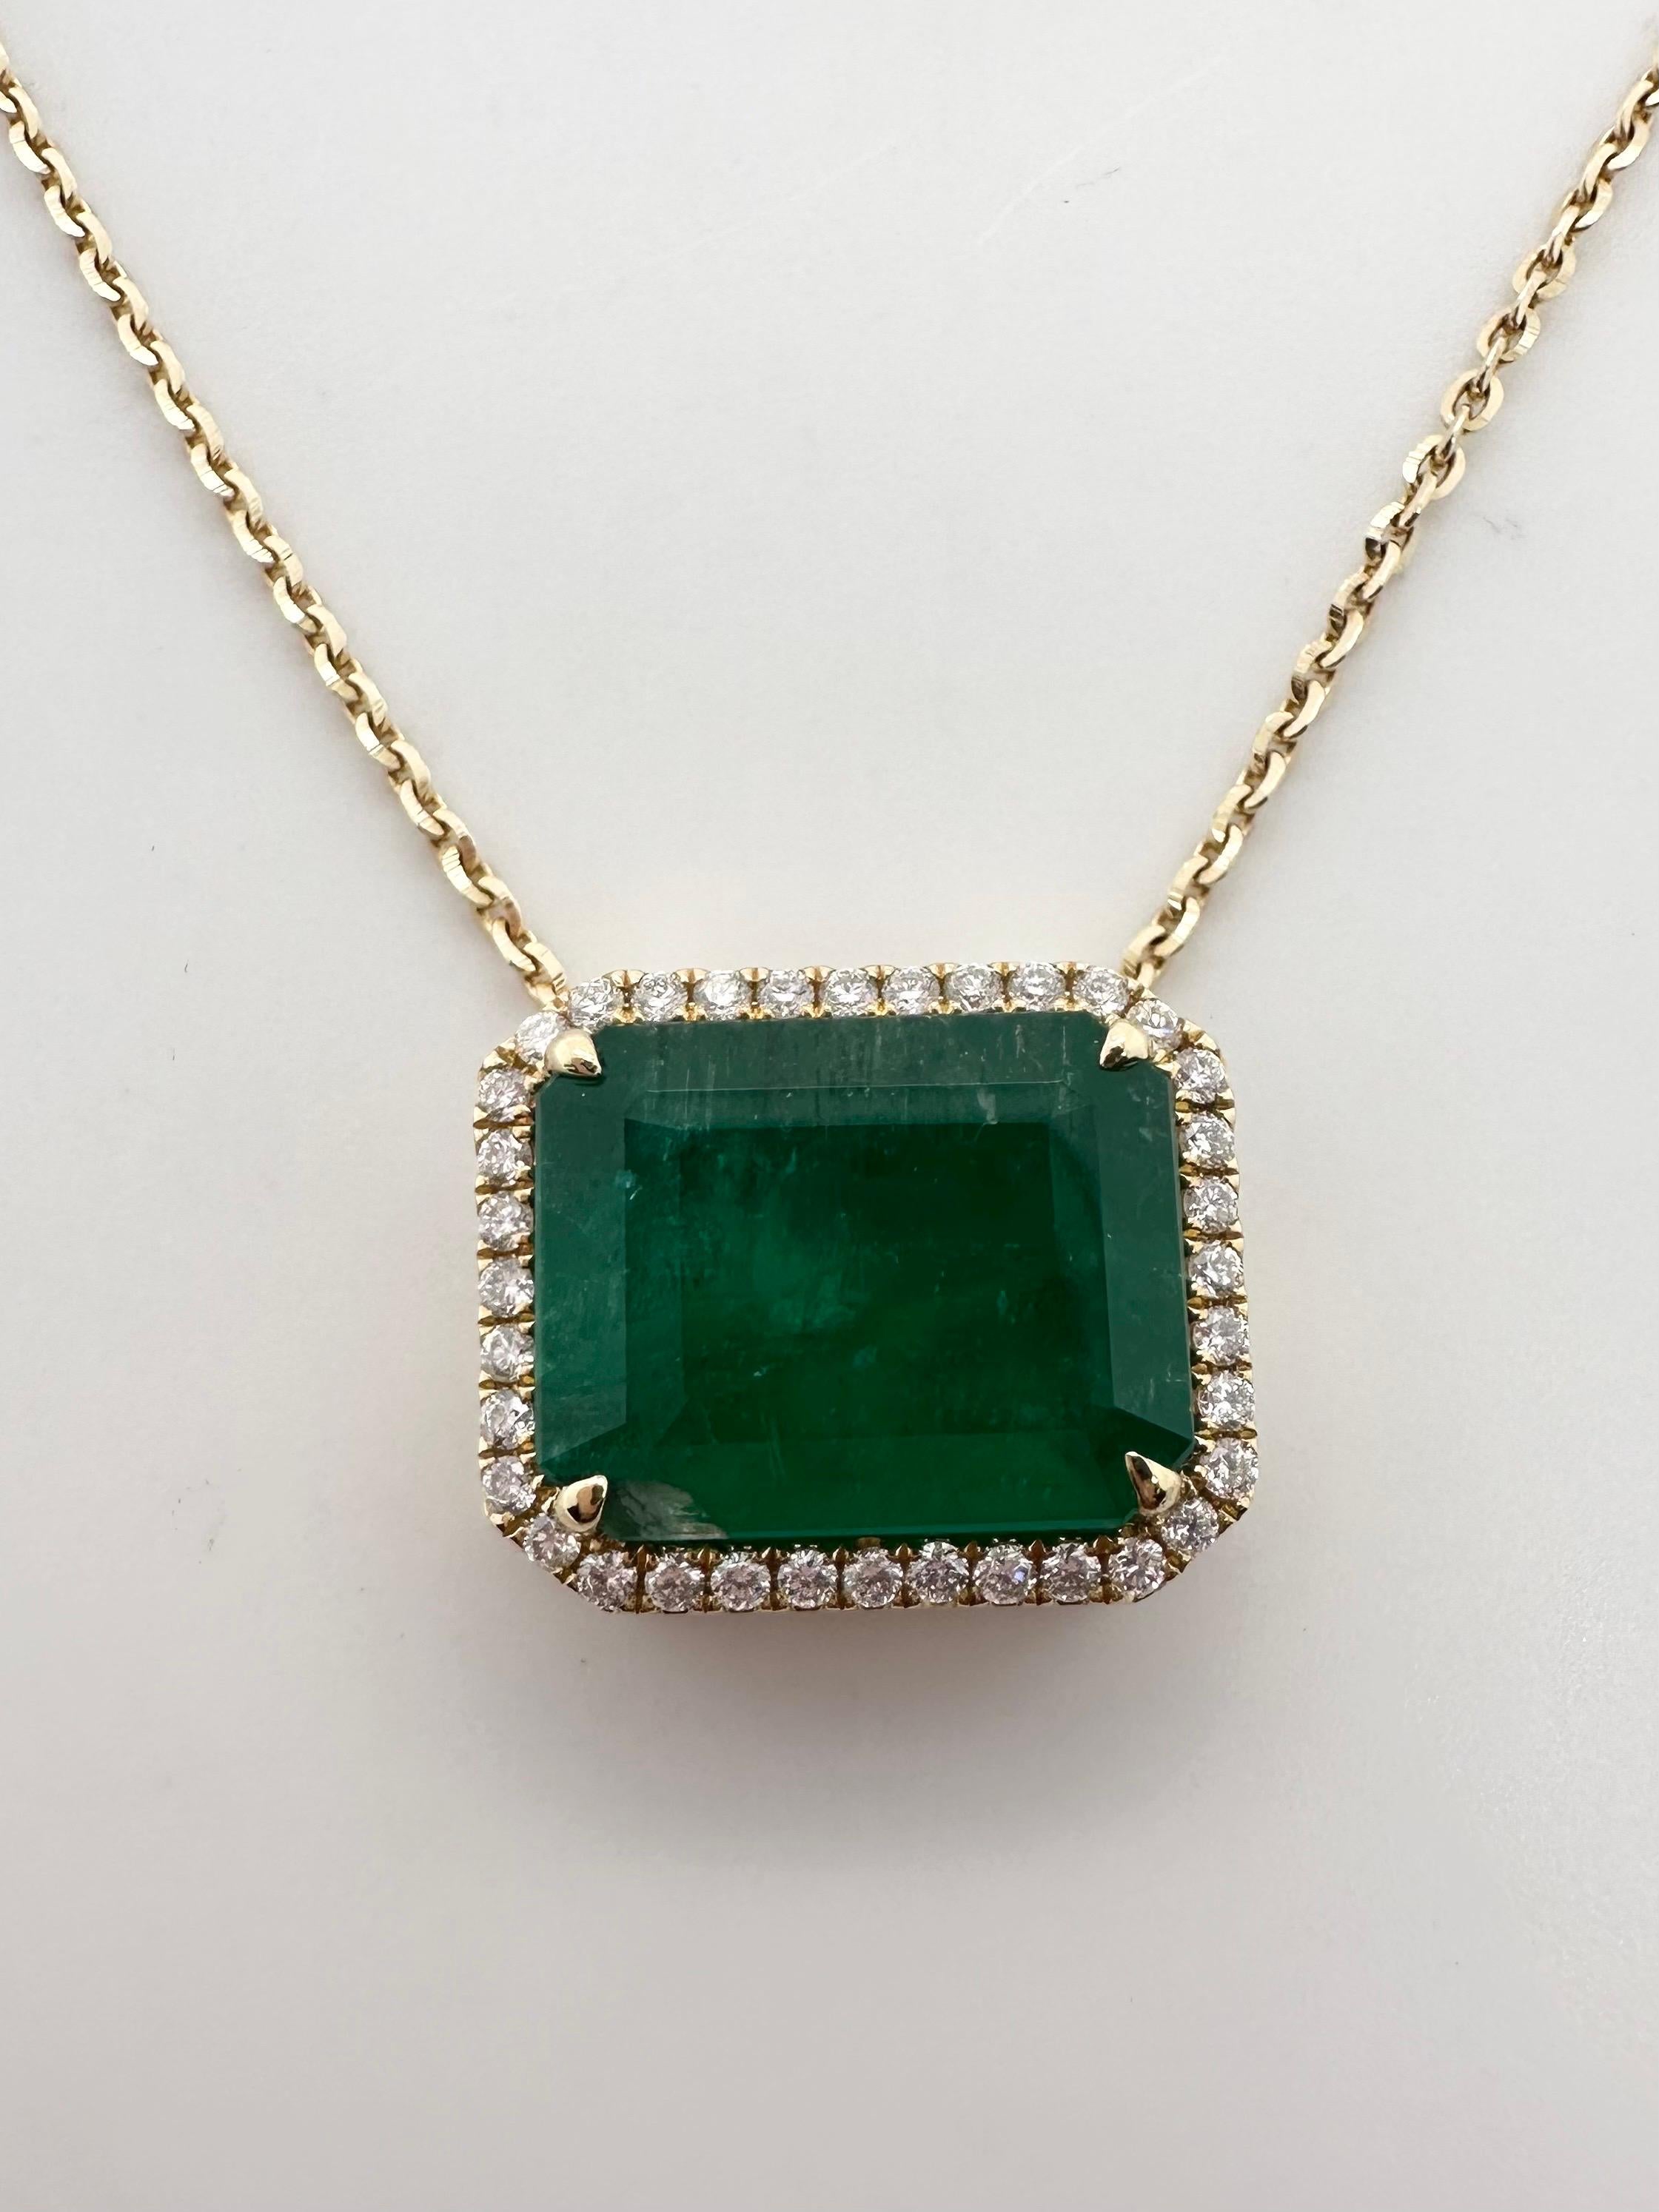 Modern emerald diamond pendant in 18Kt gold, the emerald weight 7.36 carats, green color with moderate inclusions. The diamonds weigh 0.33ct and are VS clarity and G color. Certificate for the emerald from AIG is available as well as the certificate